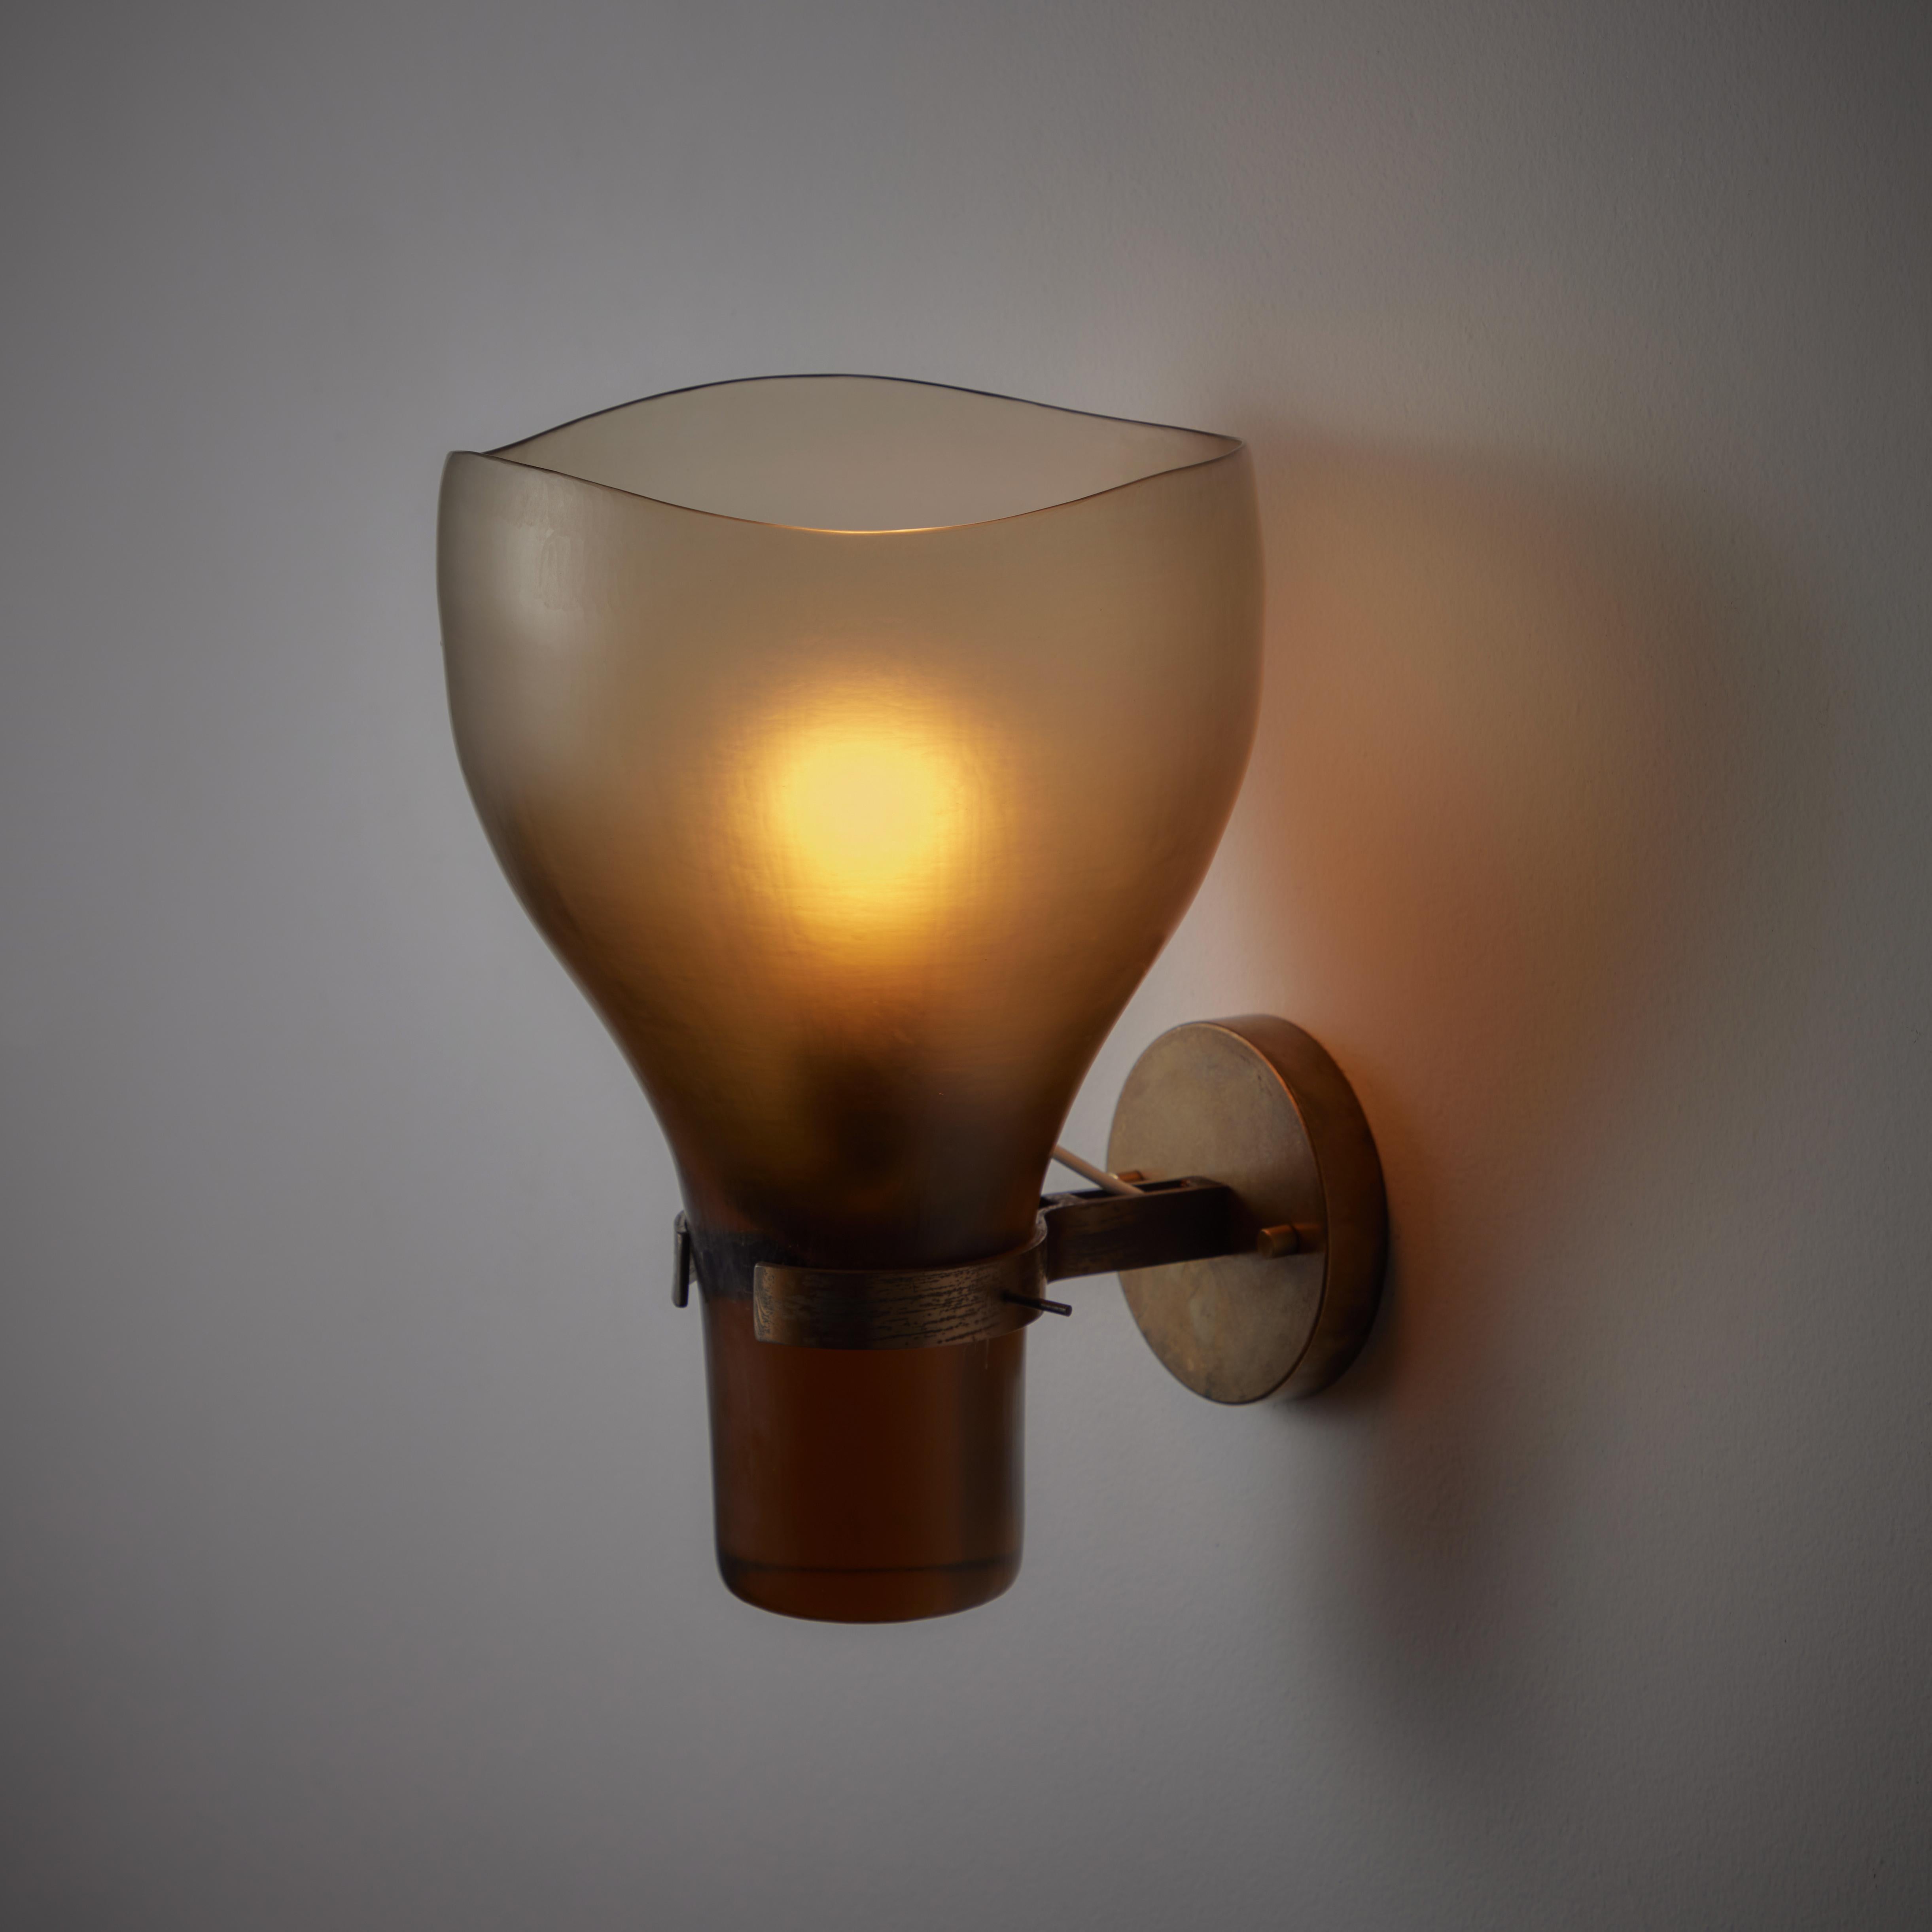 Single sconce by Tobia Scarpa for Venini. Rare battuto glass chalice shaped wall sconce in an ambient amber color. We recommend a 40w maximum E12 bulb. Wired for US Standards. Bulb not included. 

Literature: Franco Deboni, Venini Glass: Its